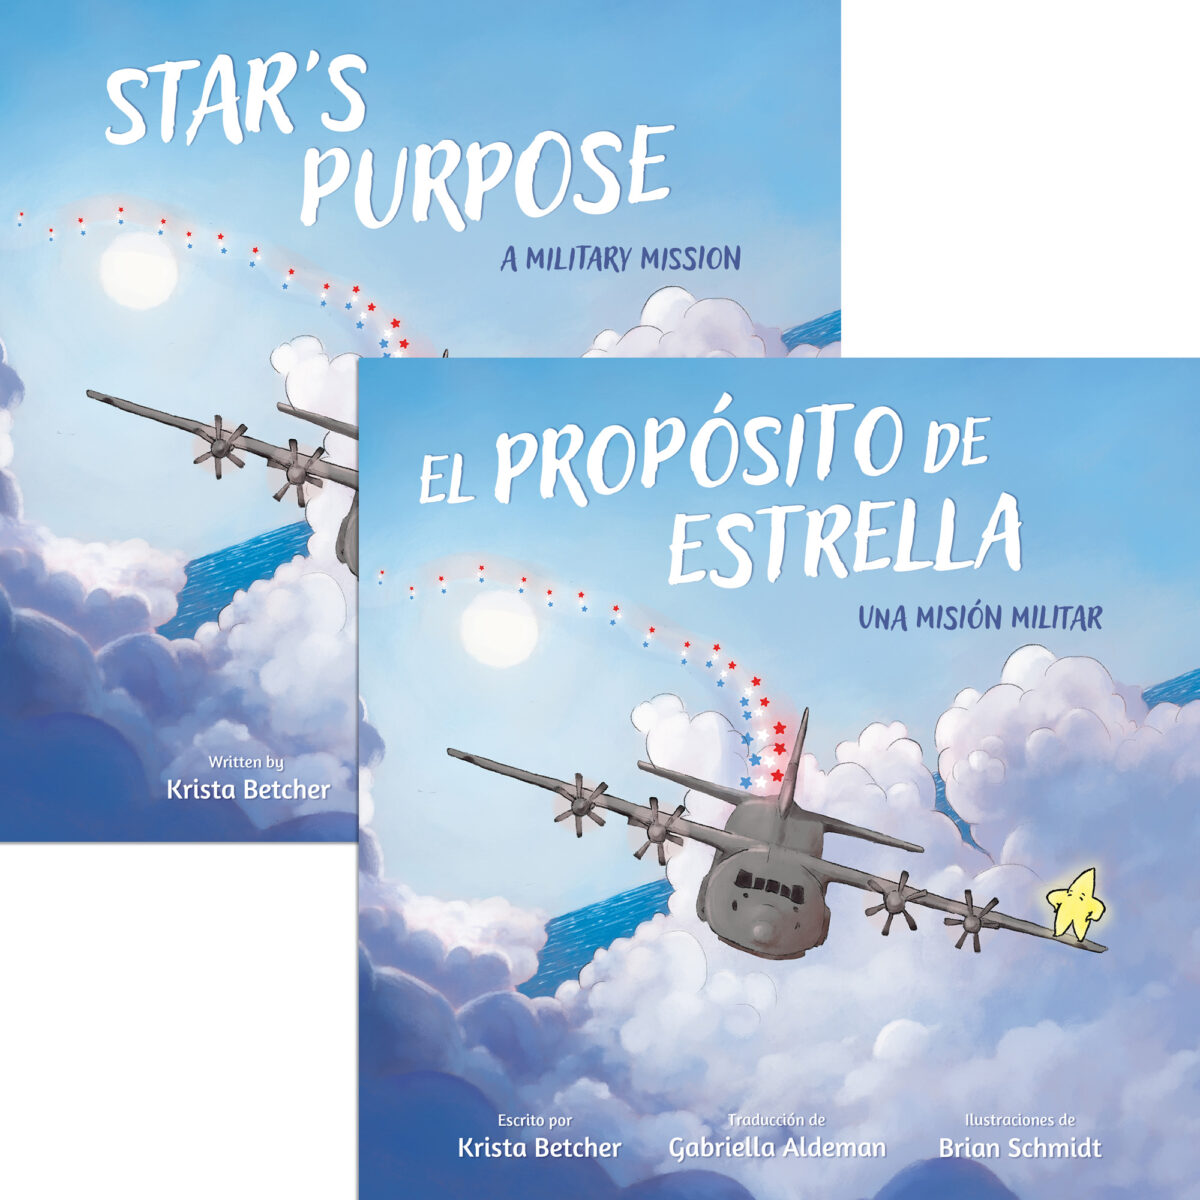 Star's Purpose: A Military Mission (English) and El propósito de Estrella: Una misión militar (Spanish) by Krista Betcher, illustrated by Brian Schmidt, translated by Gabriella Aldeman, published by Elva Resa Publishing, distributed by Military Family Books